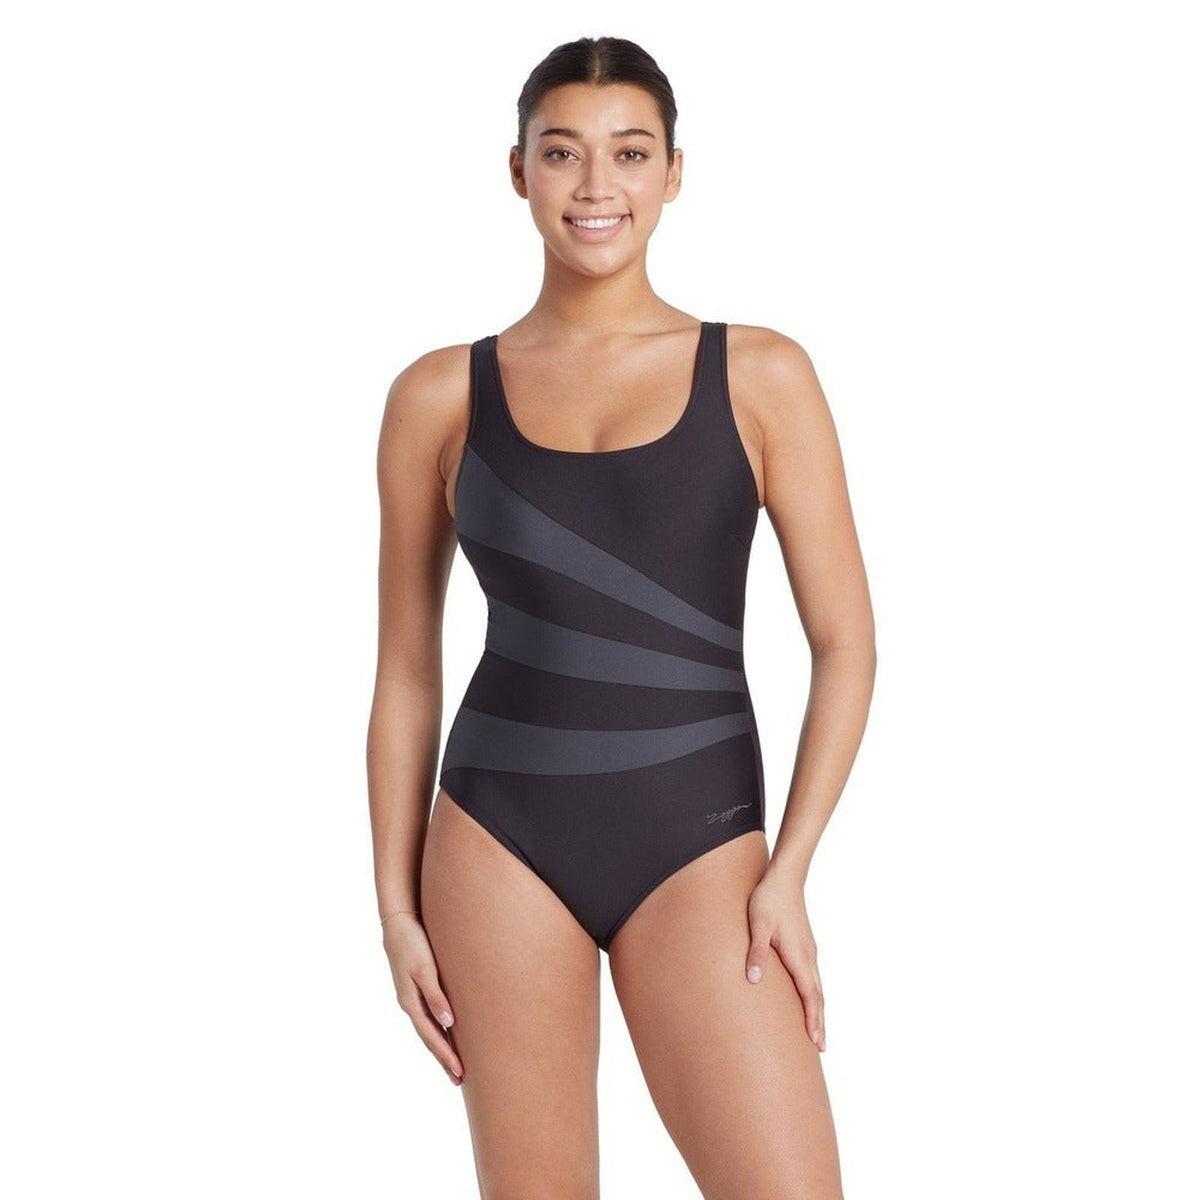 Zoggs Womens Sandon Scoopback One Piece Swimsuit - Black